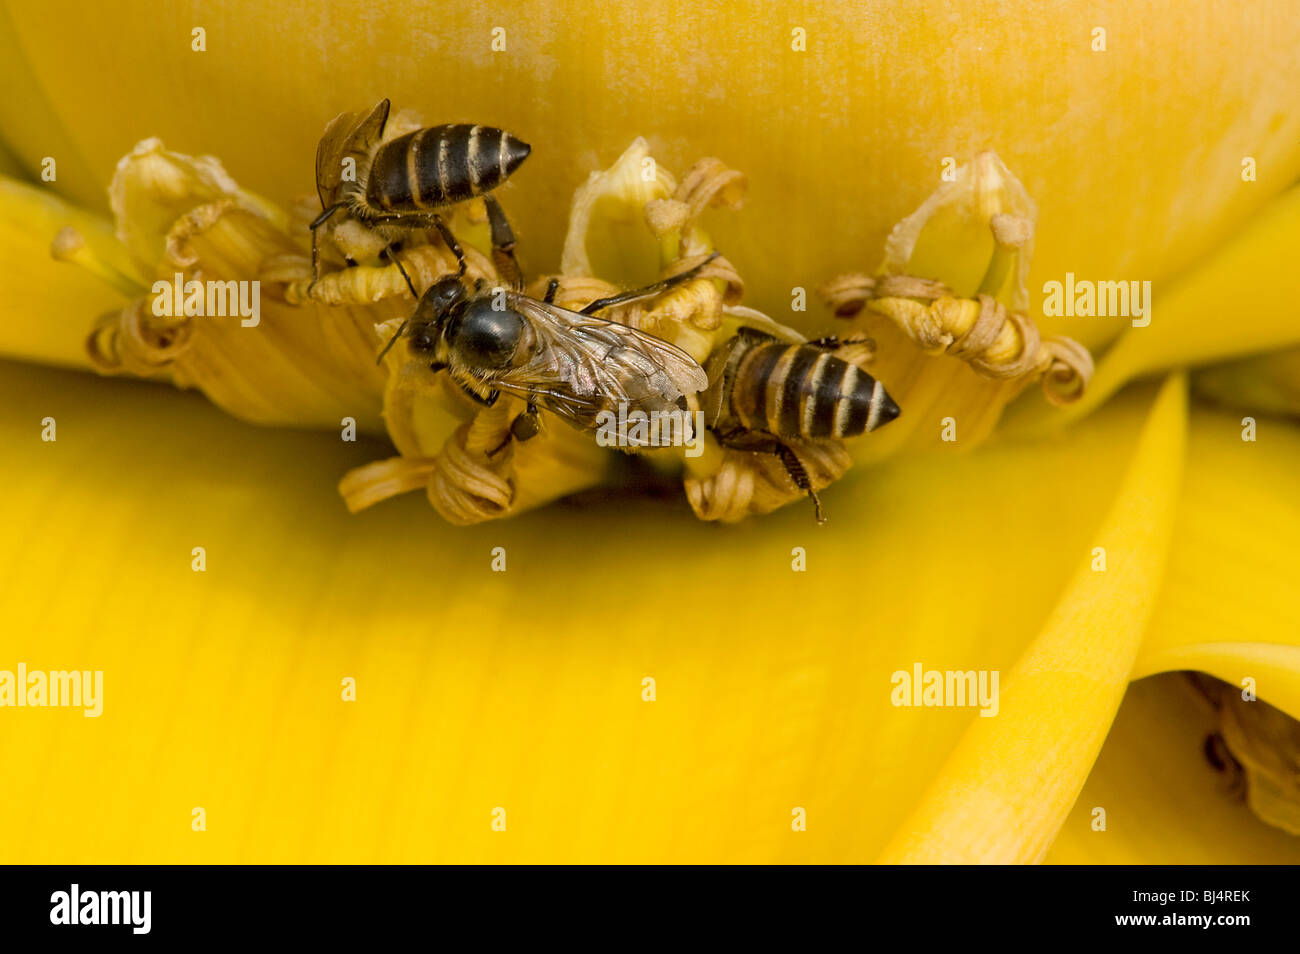 Bees feeding on Chinese yellow banana or golden lotus flowers Stock Photo